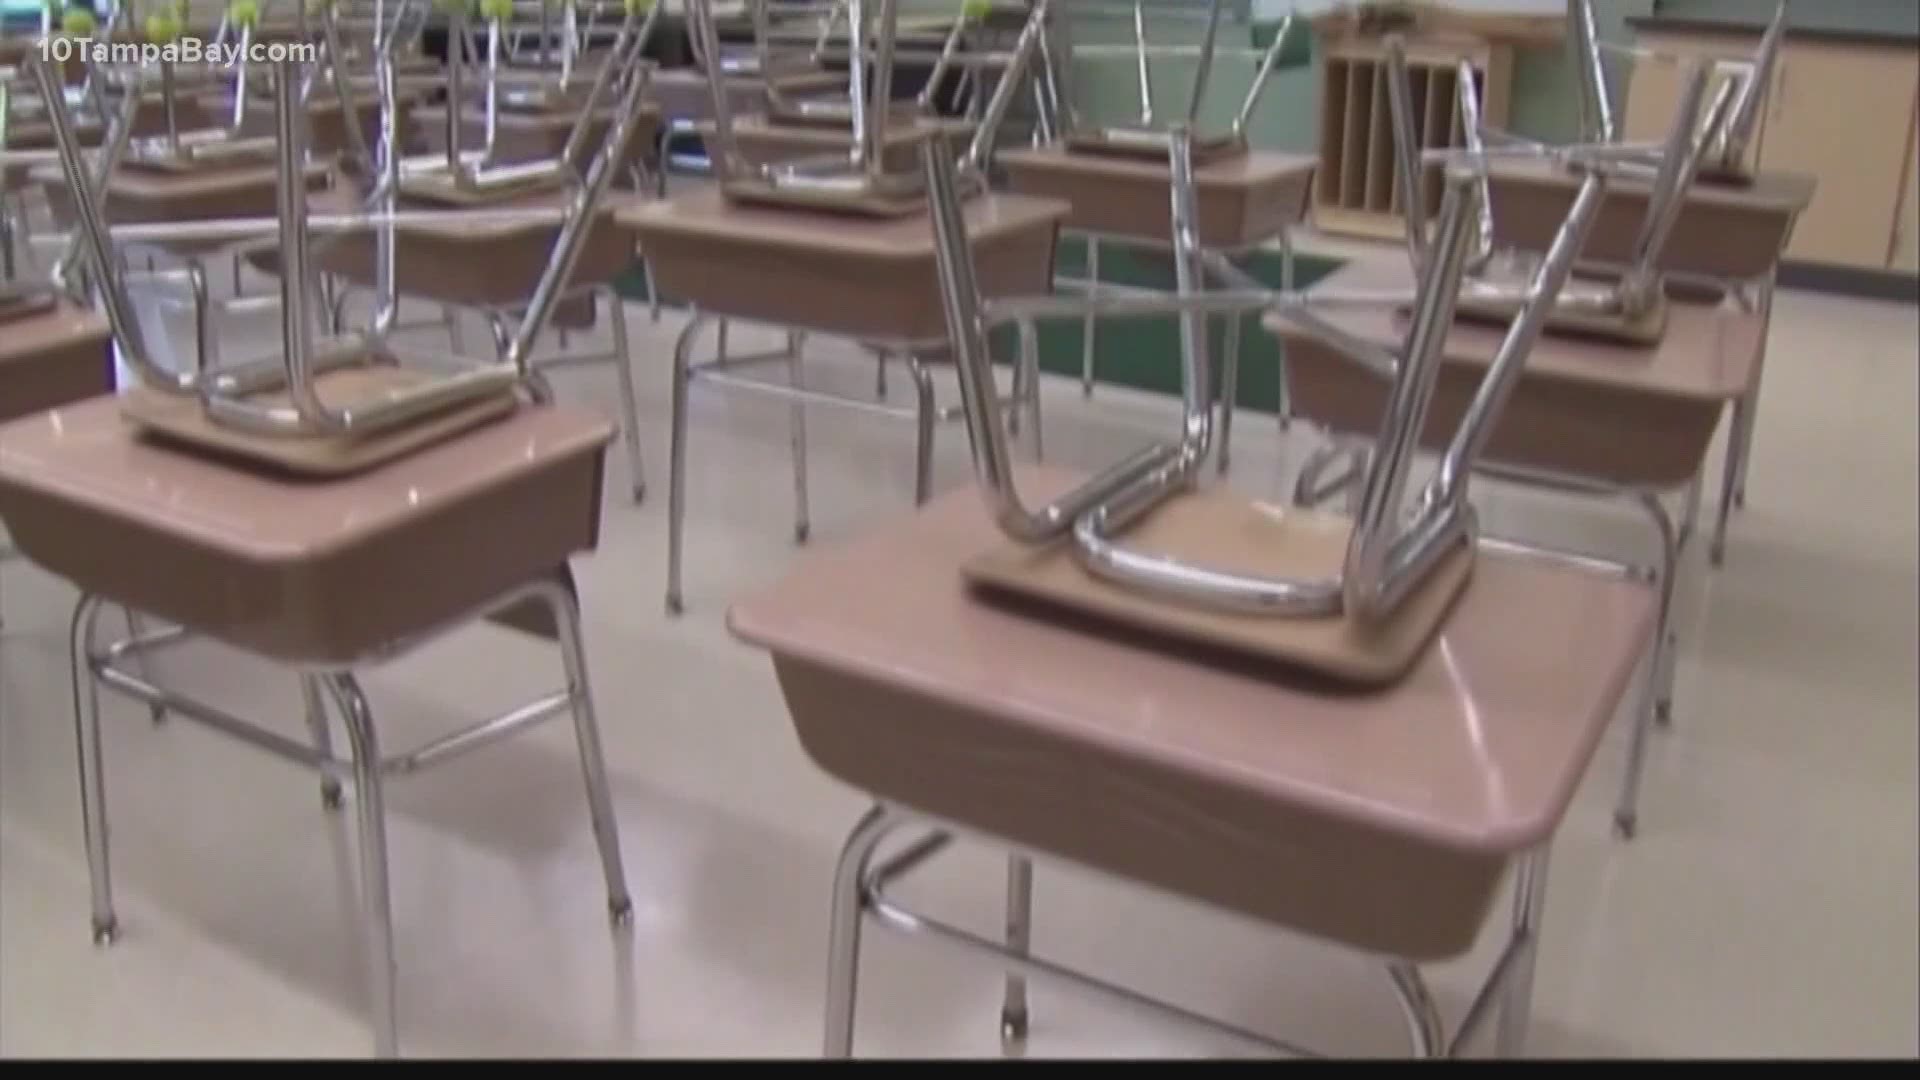 10 Investigates looked into whether the state has a plan to let the public know about positive coronavirus cases in classrooms.